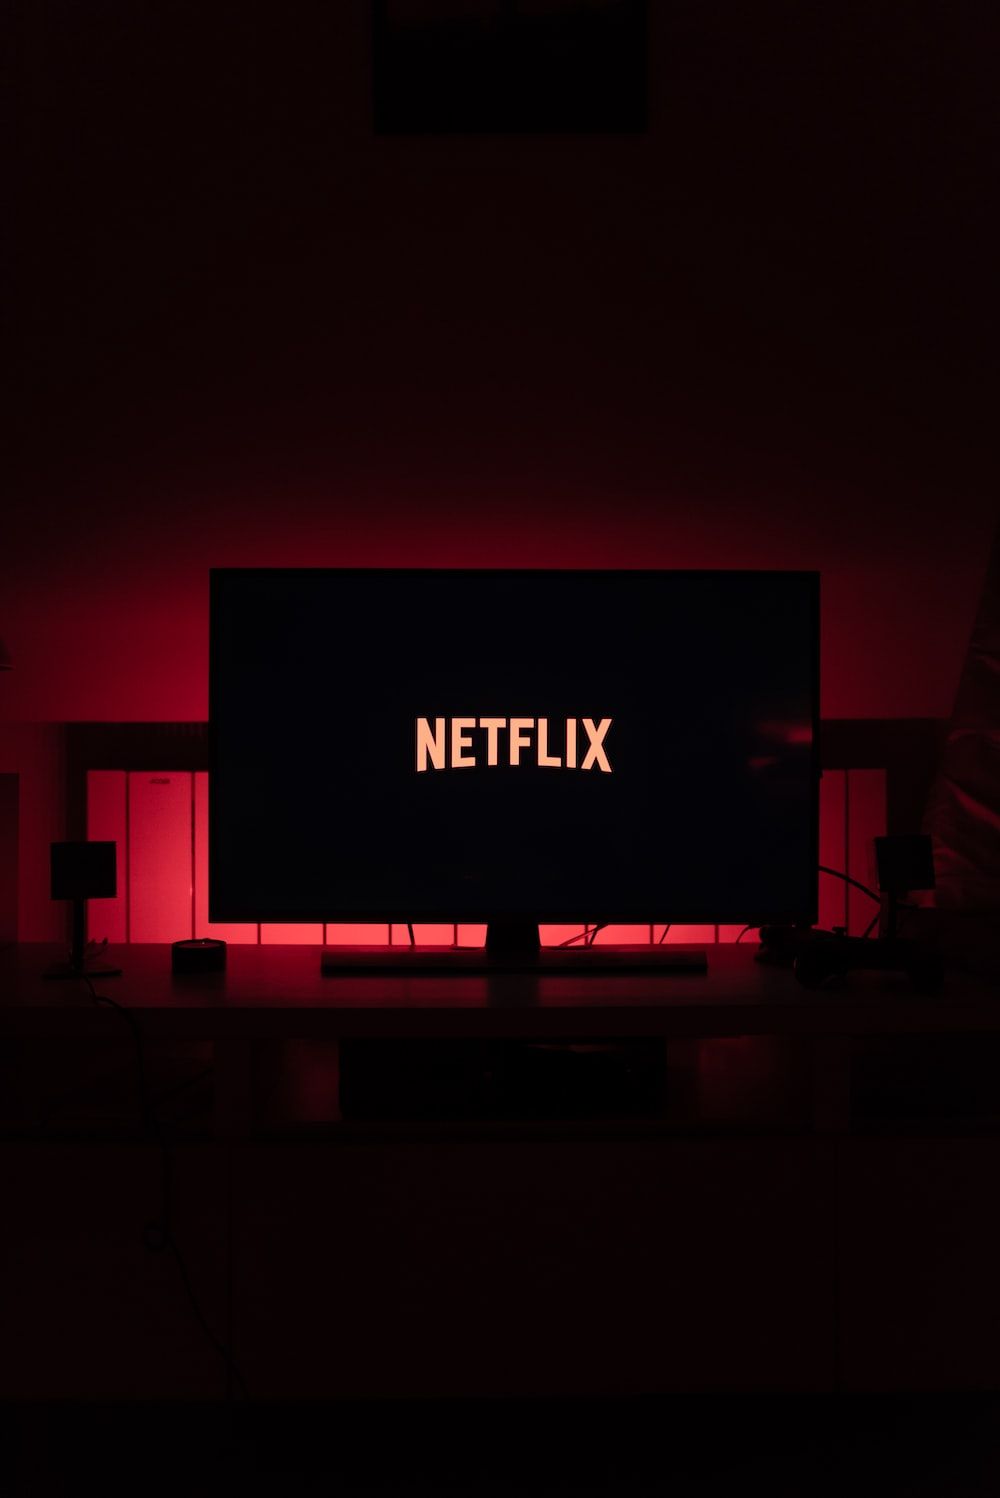 Netflix And Chill Picture. Download Free Image